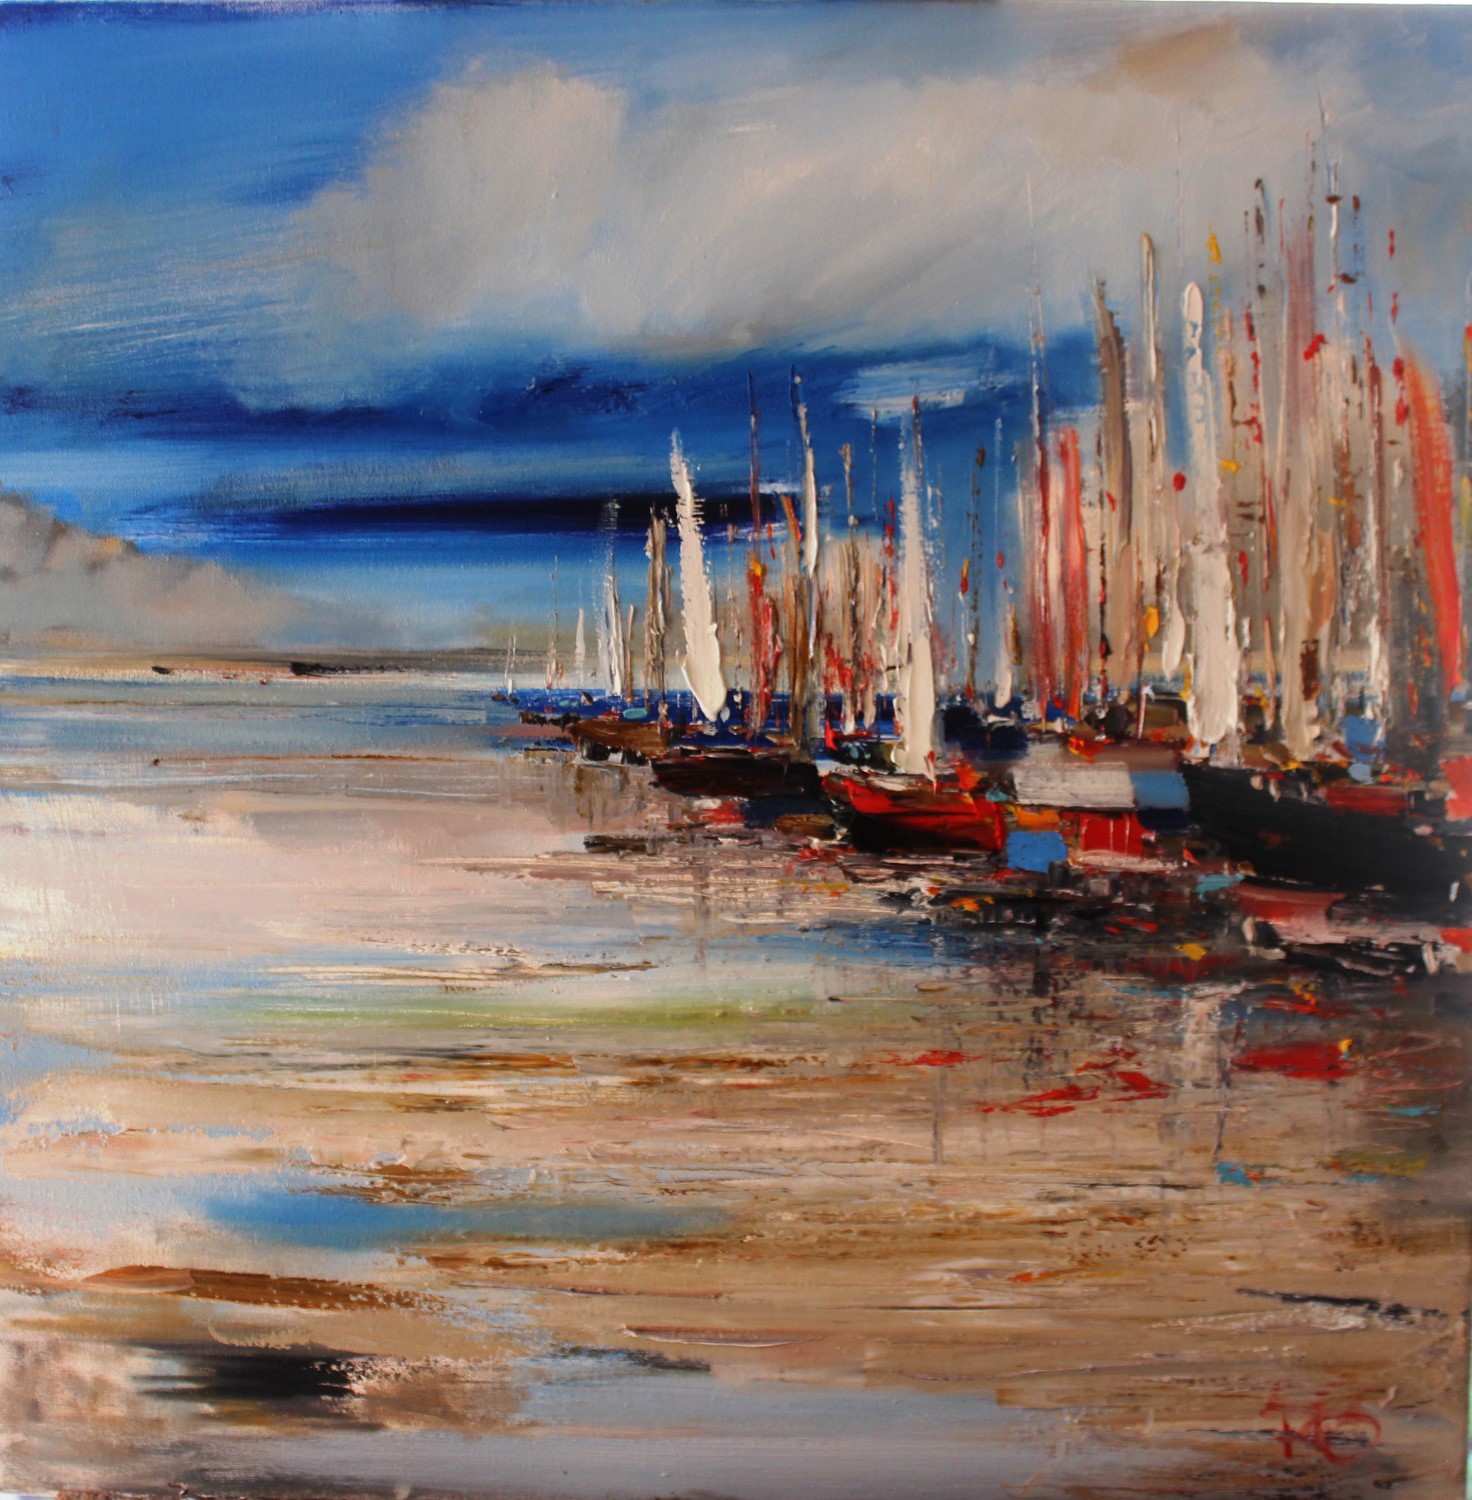 'Boats Gathered' by artist Rosanne Barr